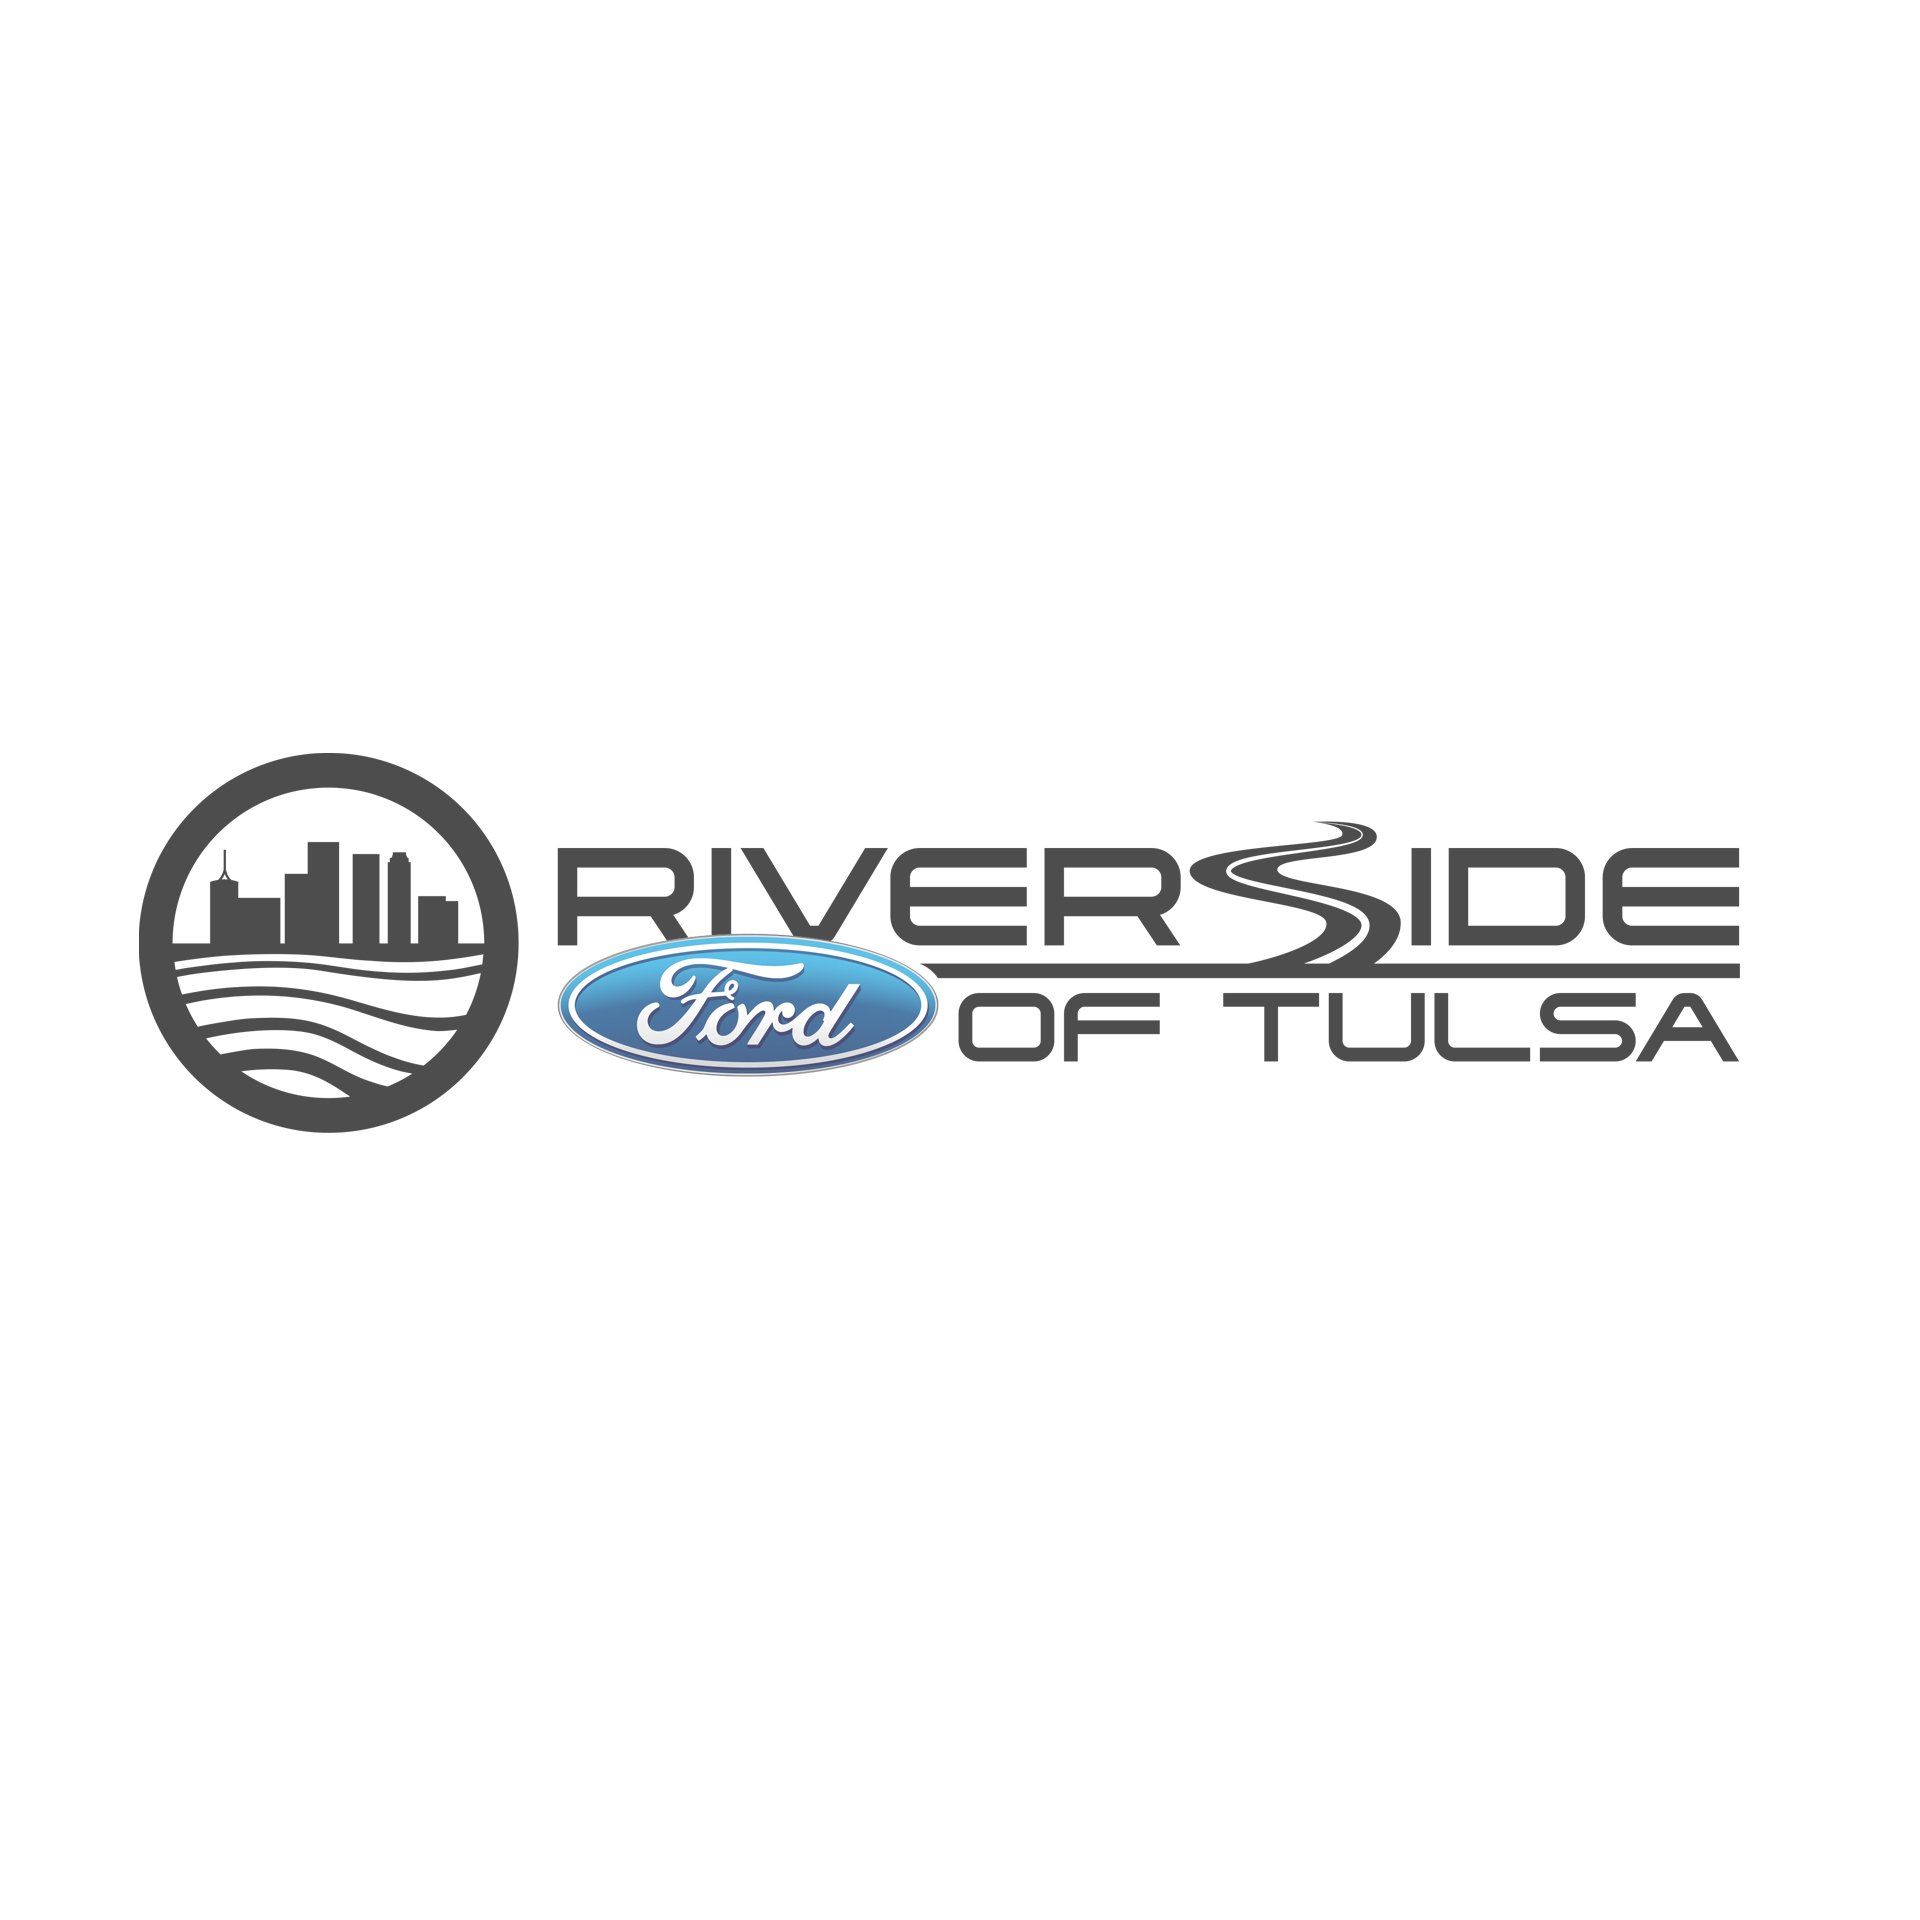 Riverside ford of tulsa is a ford dealership in tulsa.